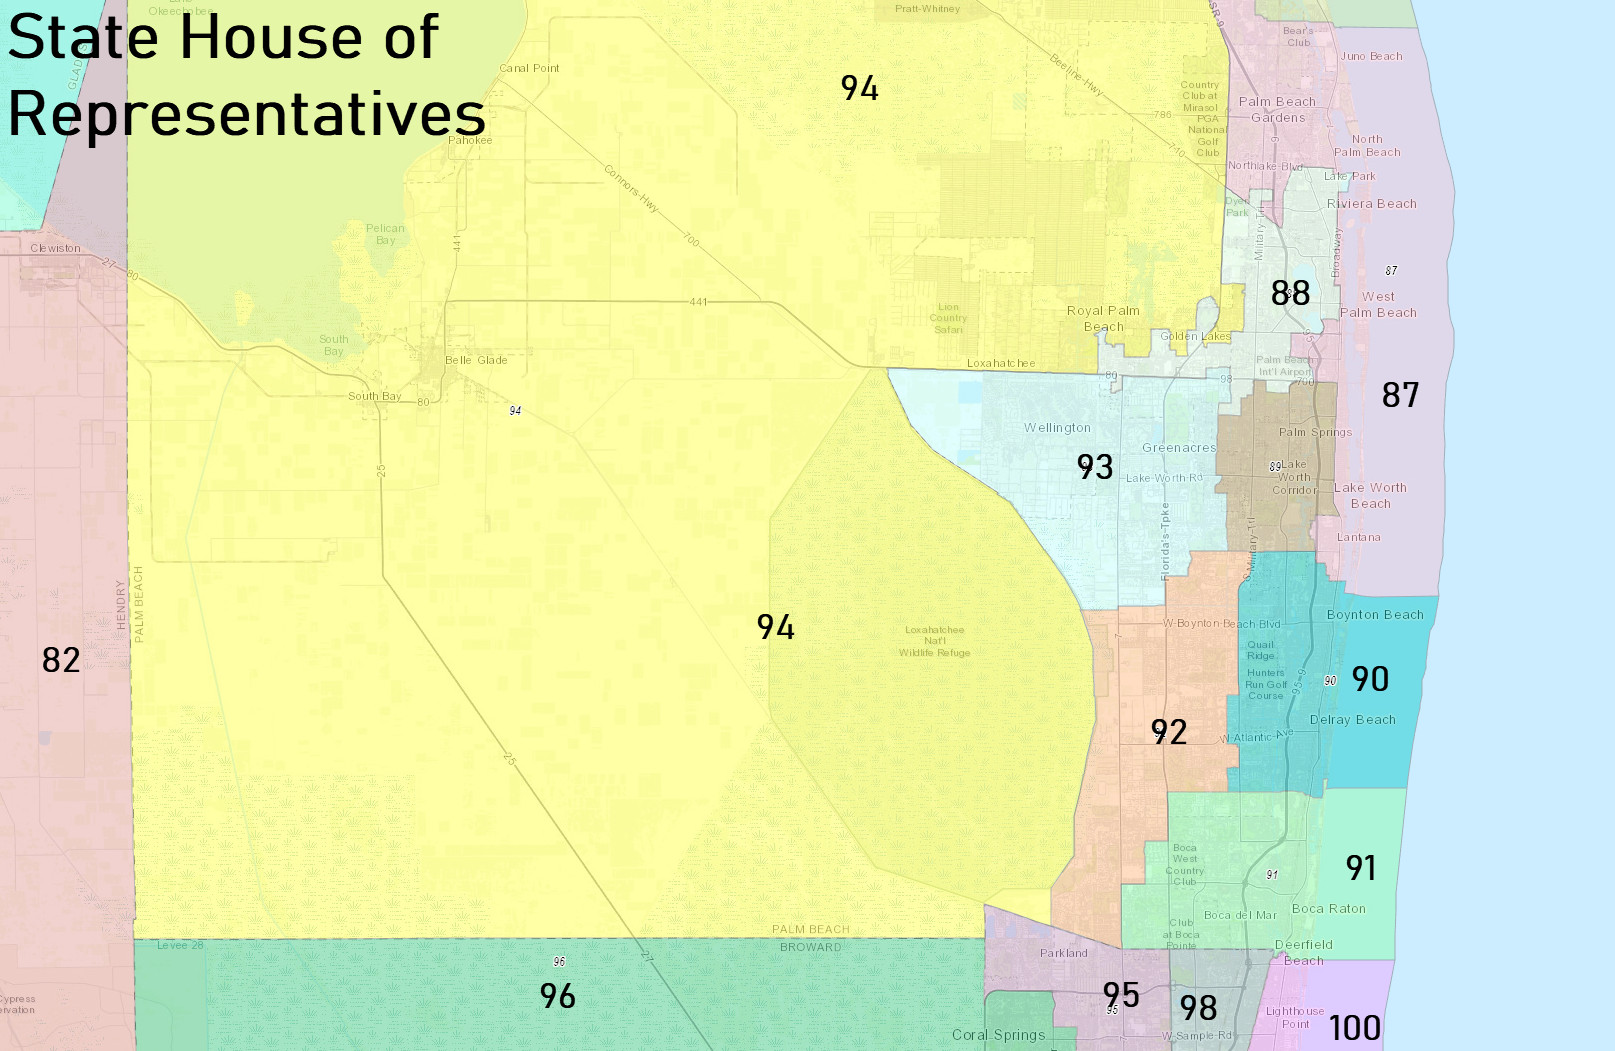 Map of Florida State House of Representatives Districts - <a href="https://redistricting.maps.arcgis.com/apps/View/index.html?appid=7bd994dee18448809be1a1a2110d323a" target="_blank">Click here to view an interactive map</a> (it will be opened in a new tab)